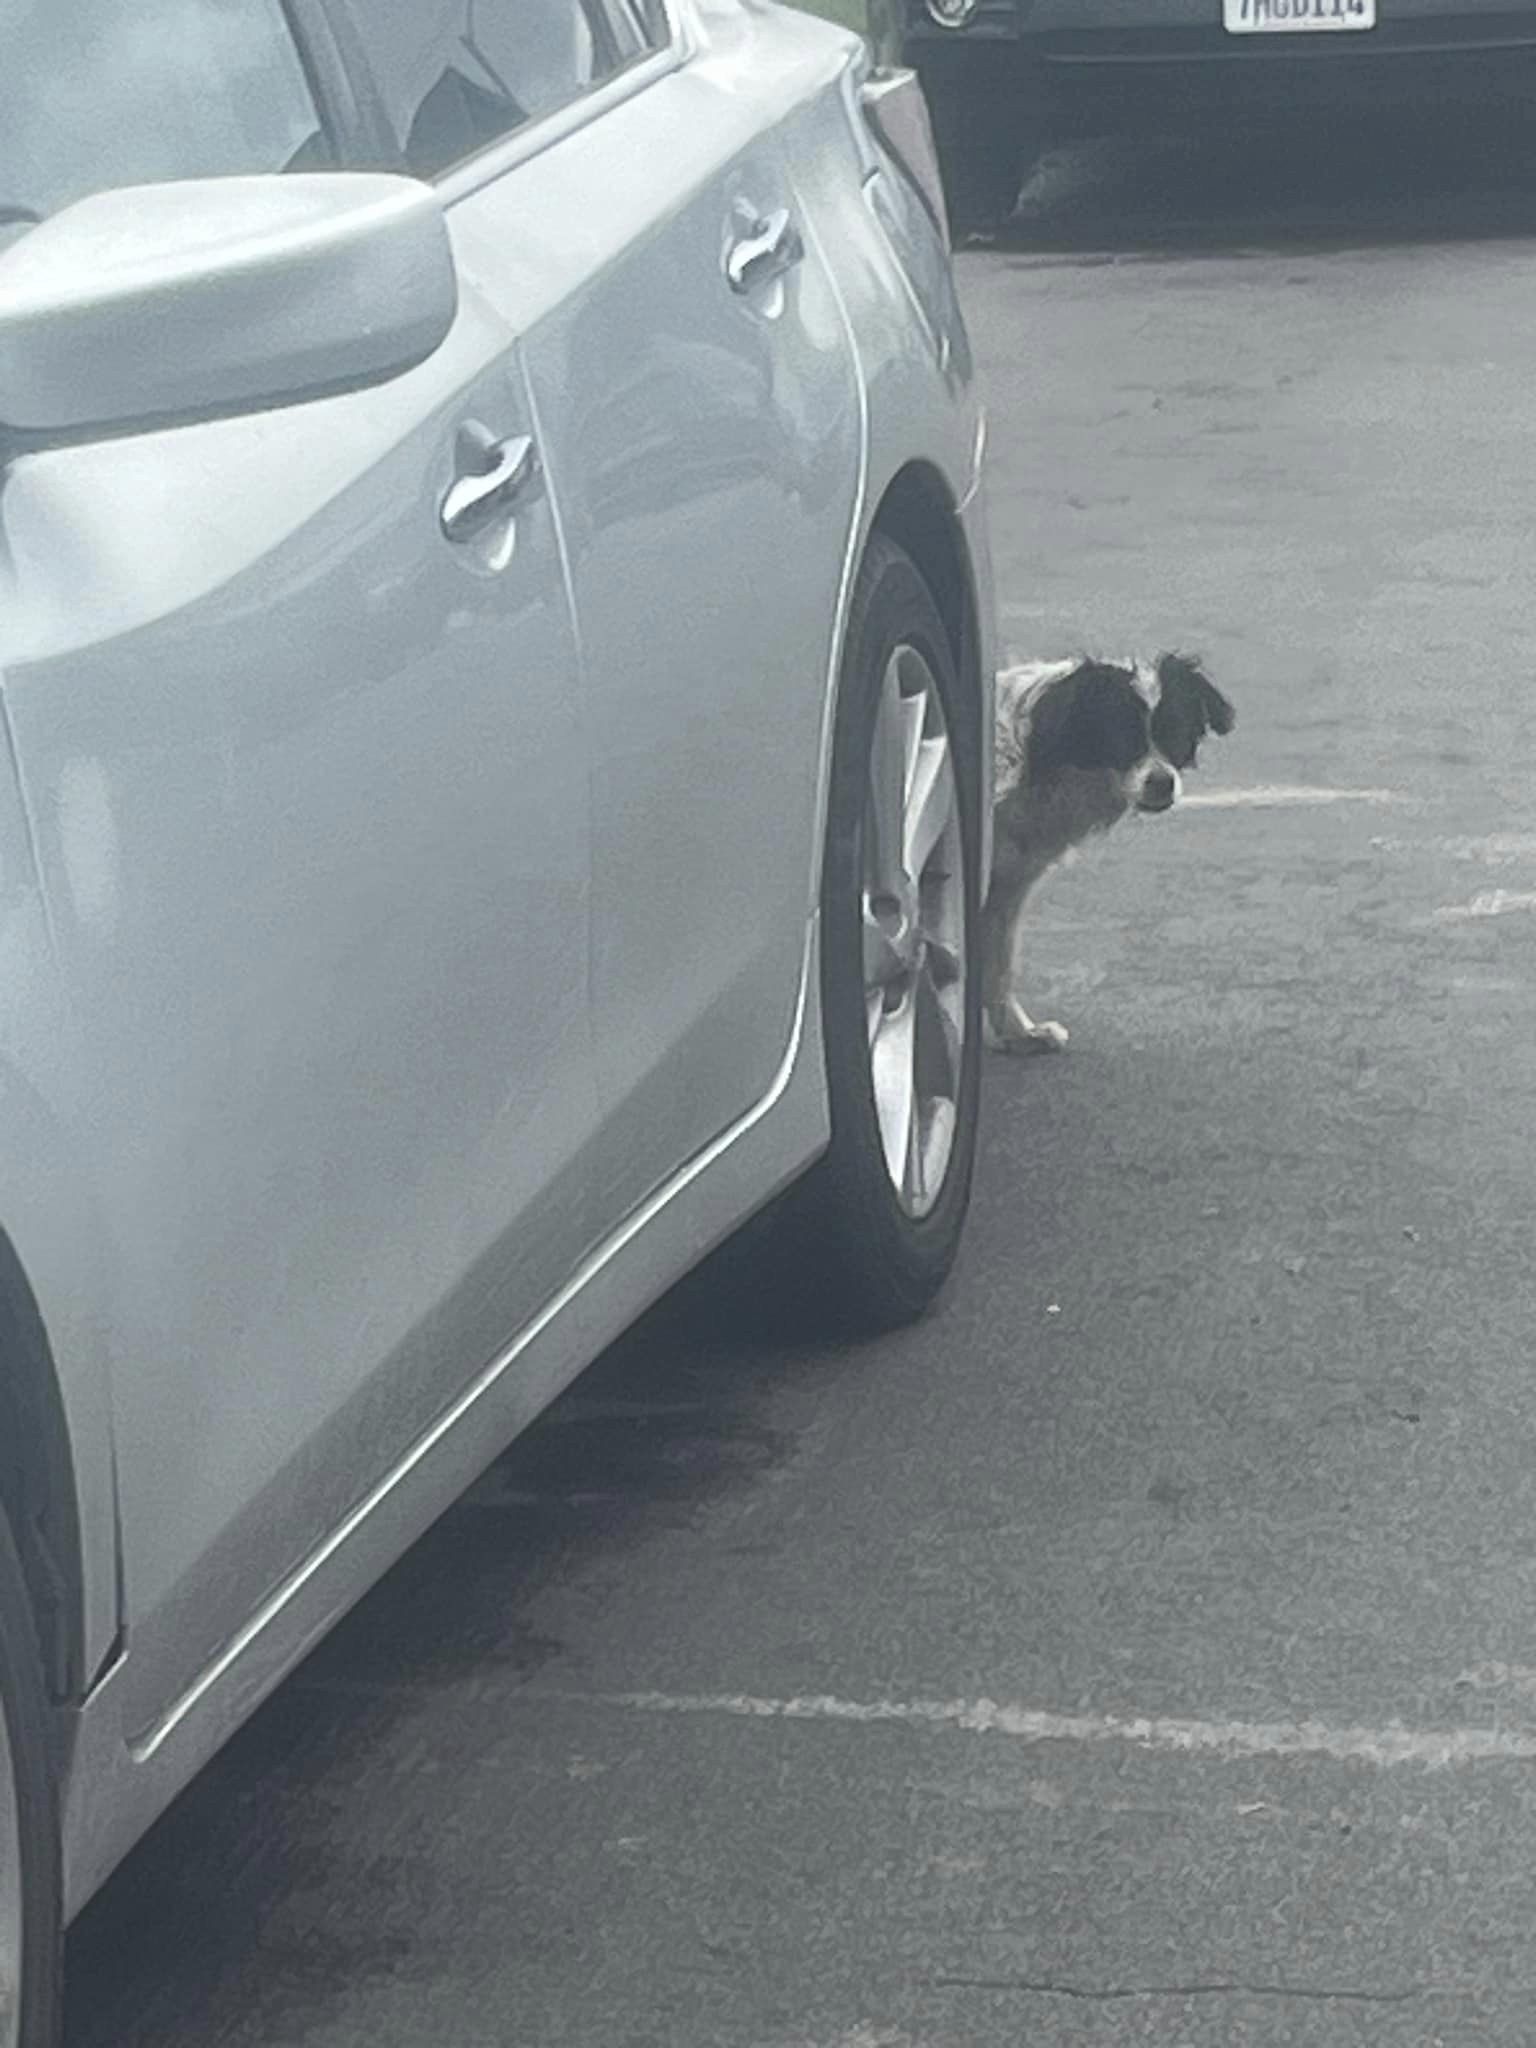 dog standing behind the car